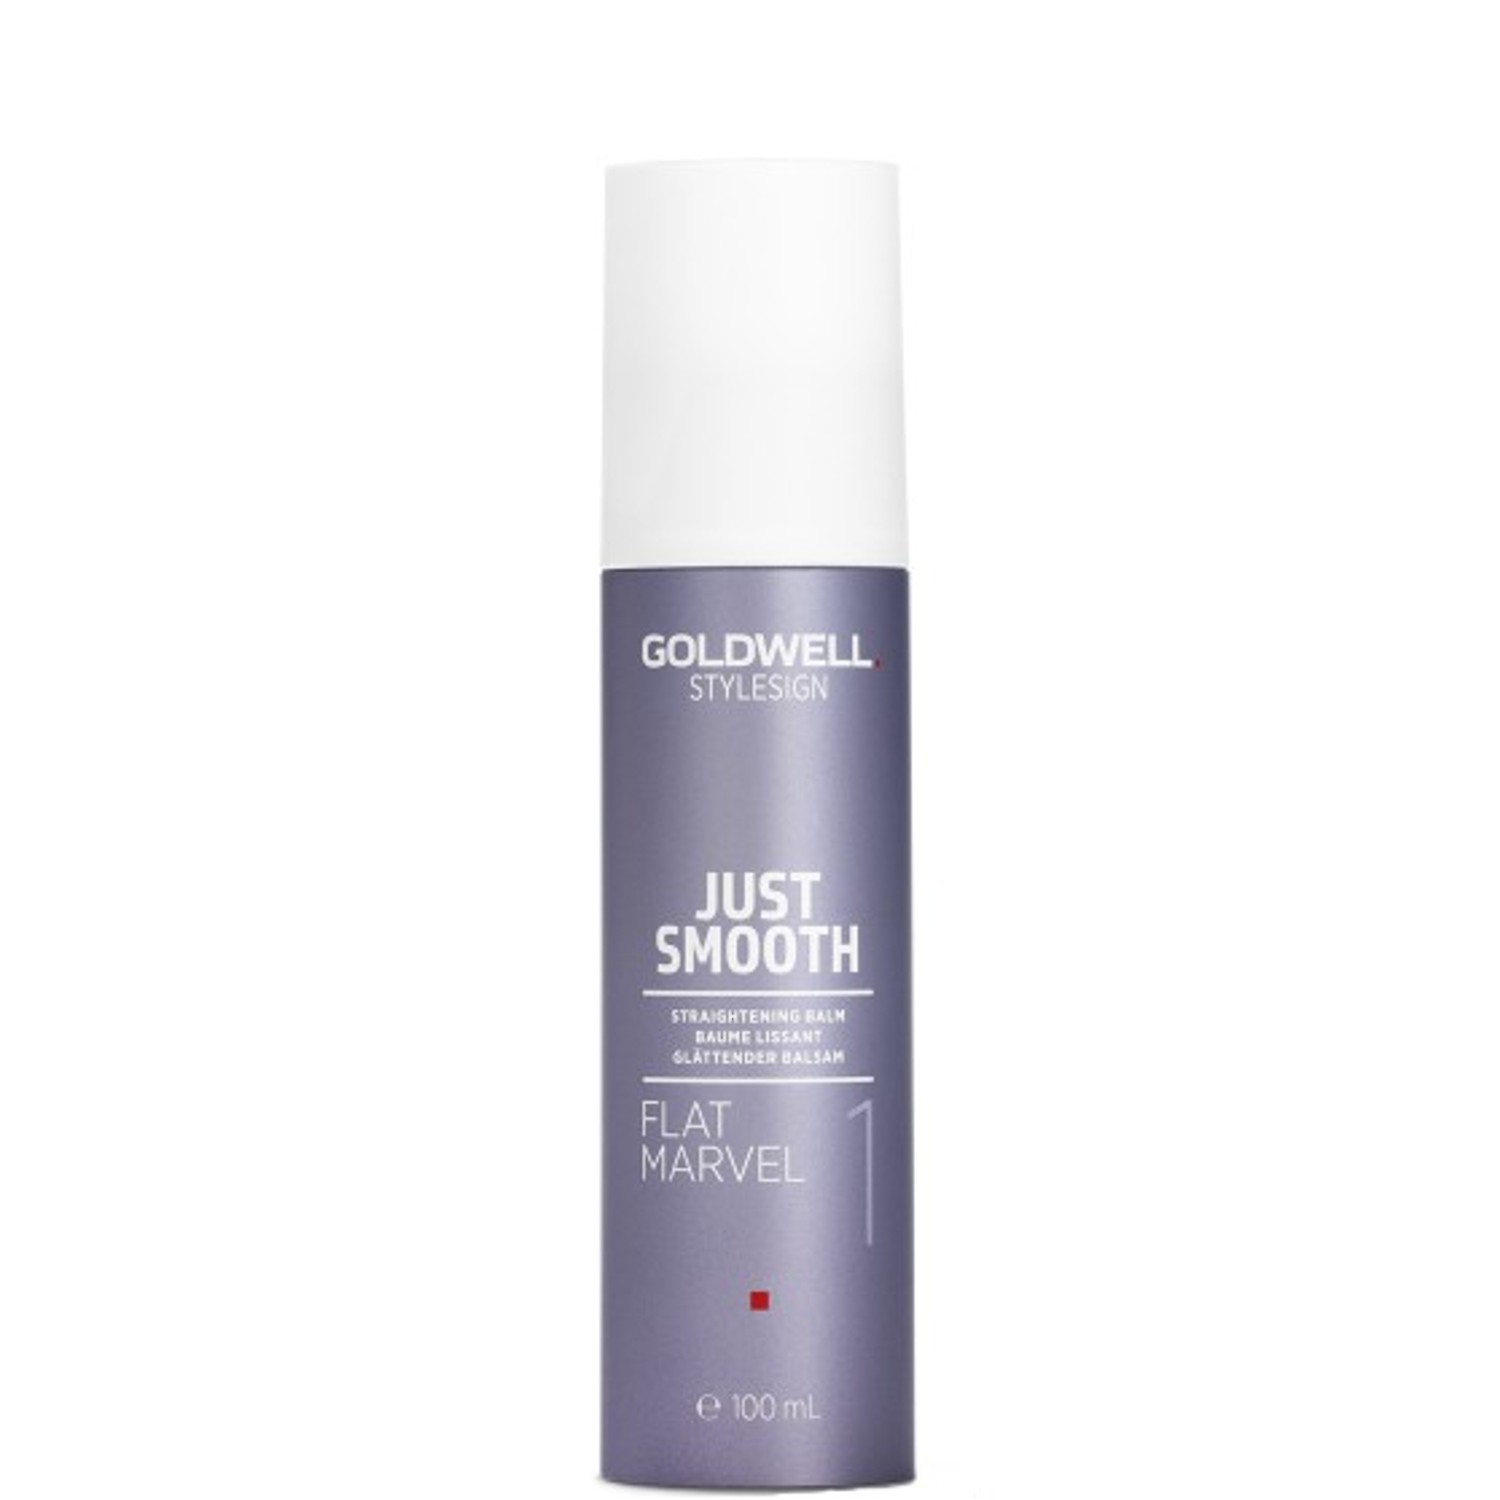 GOLDWELL Style Sign Just Smooth FLAT MARVEL 100 ml